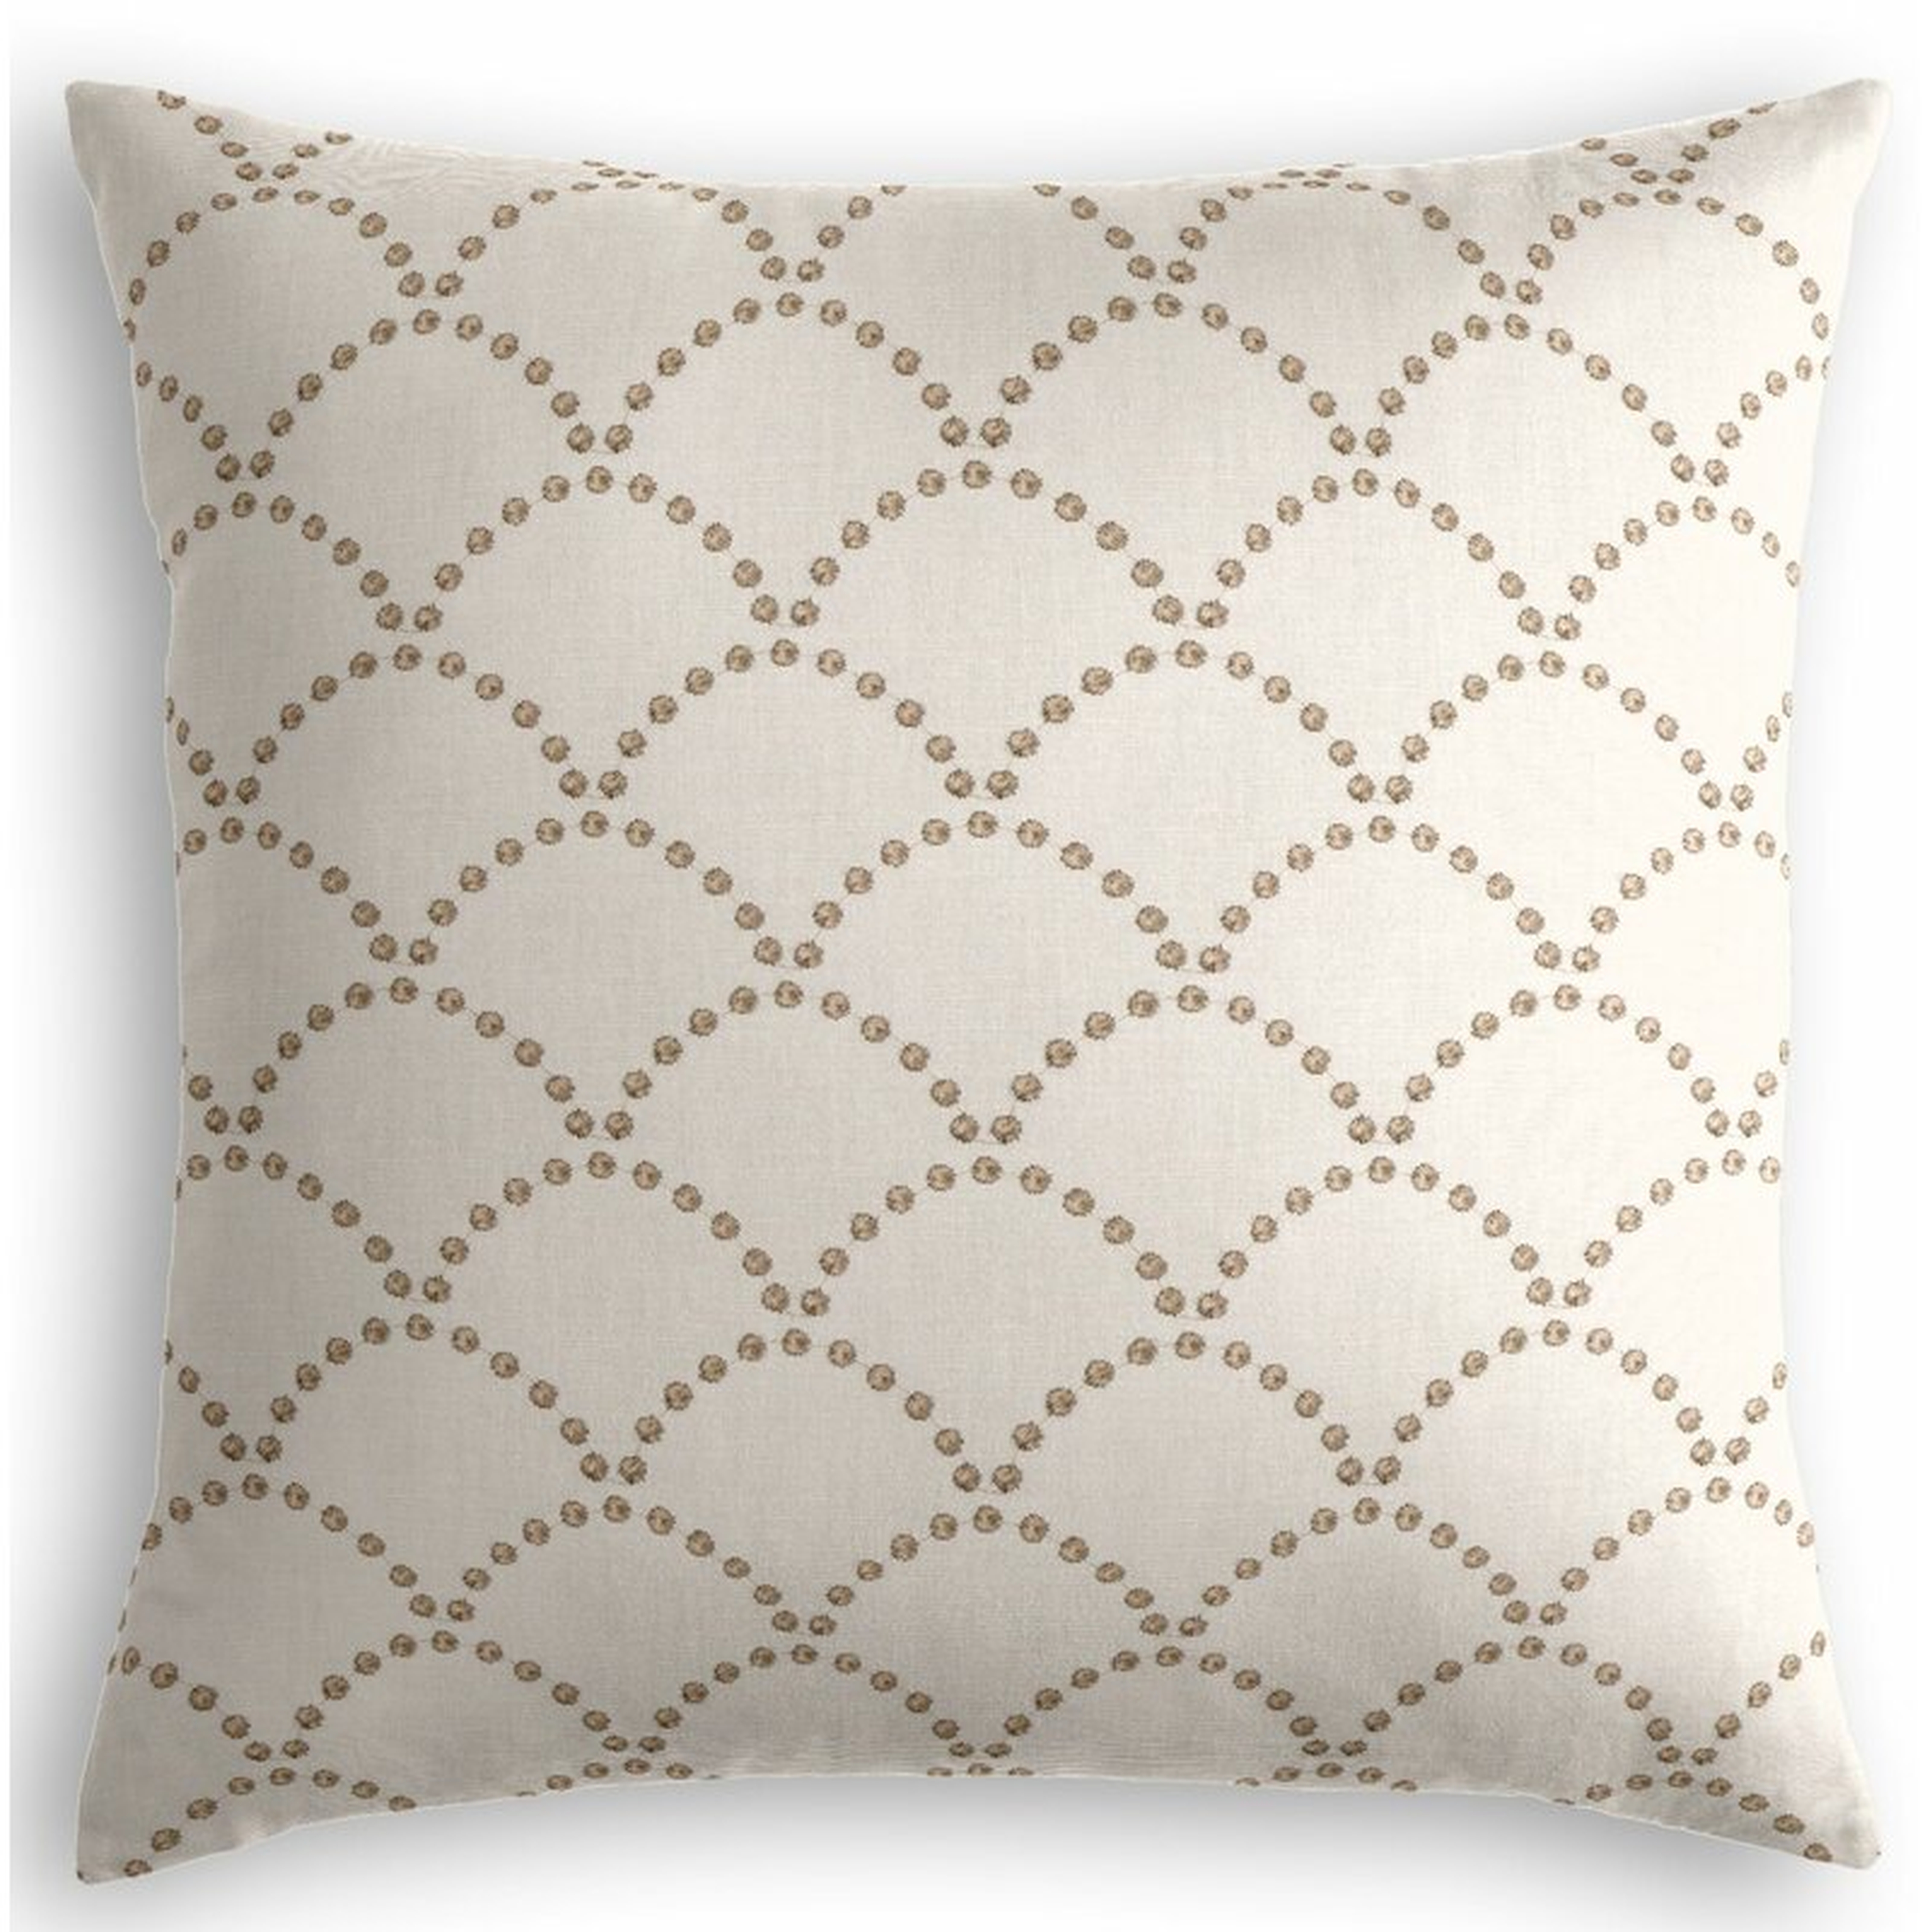 Loom Decor Embroidered Scallop Linen Throw Pillow Size: 20 x 20 / Taupe - Perigold